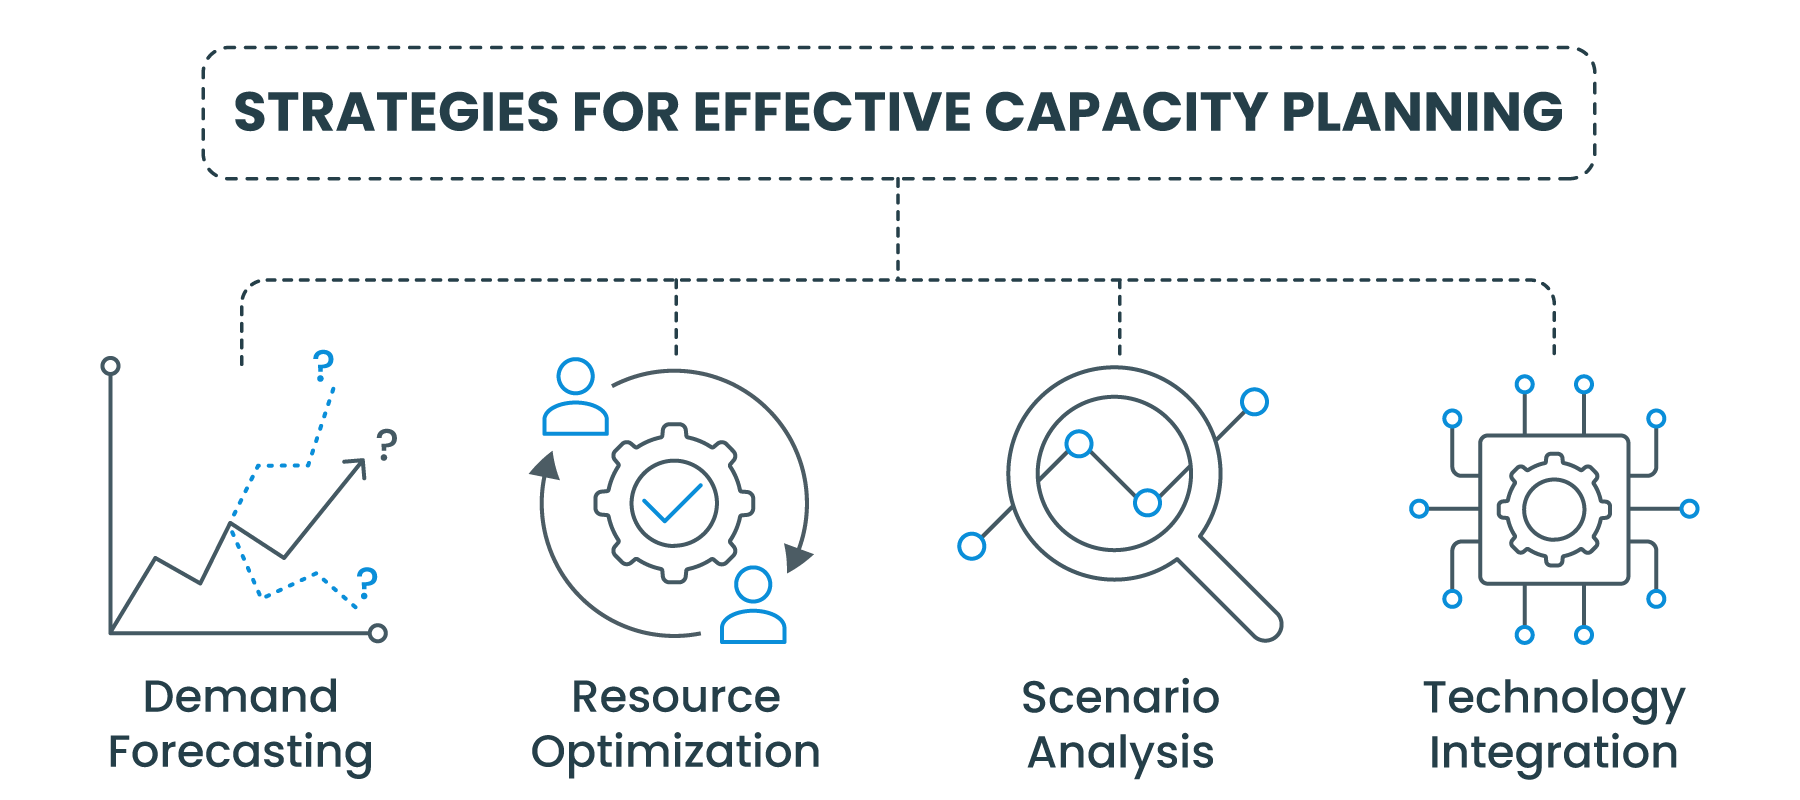 Strategies for Effective Capacity Planning